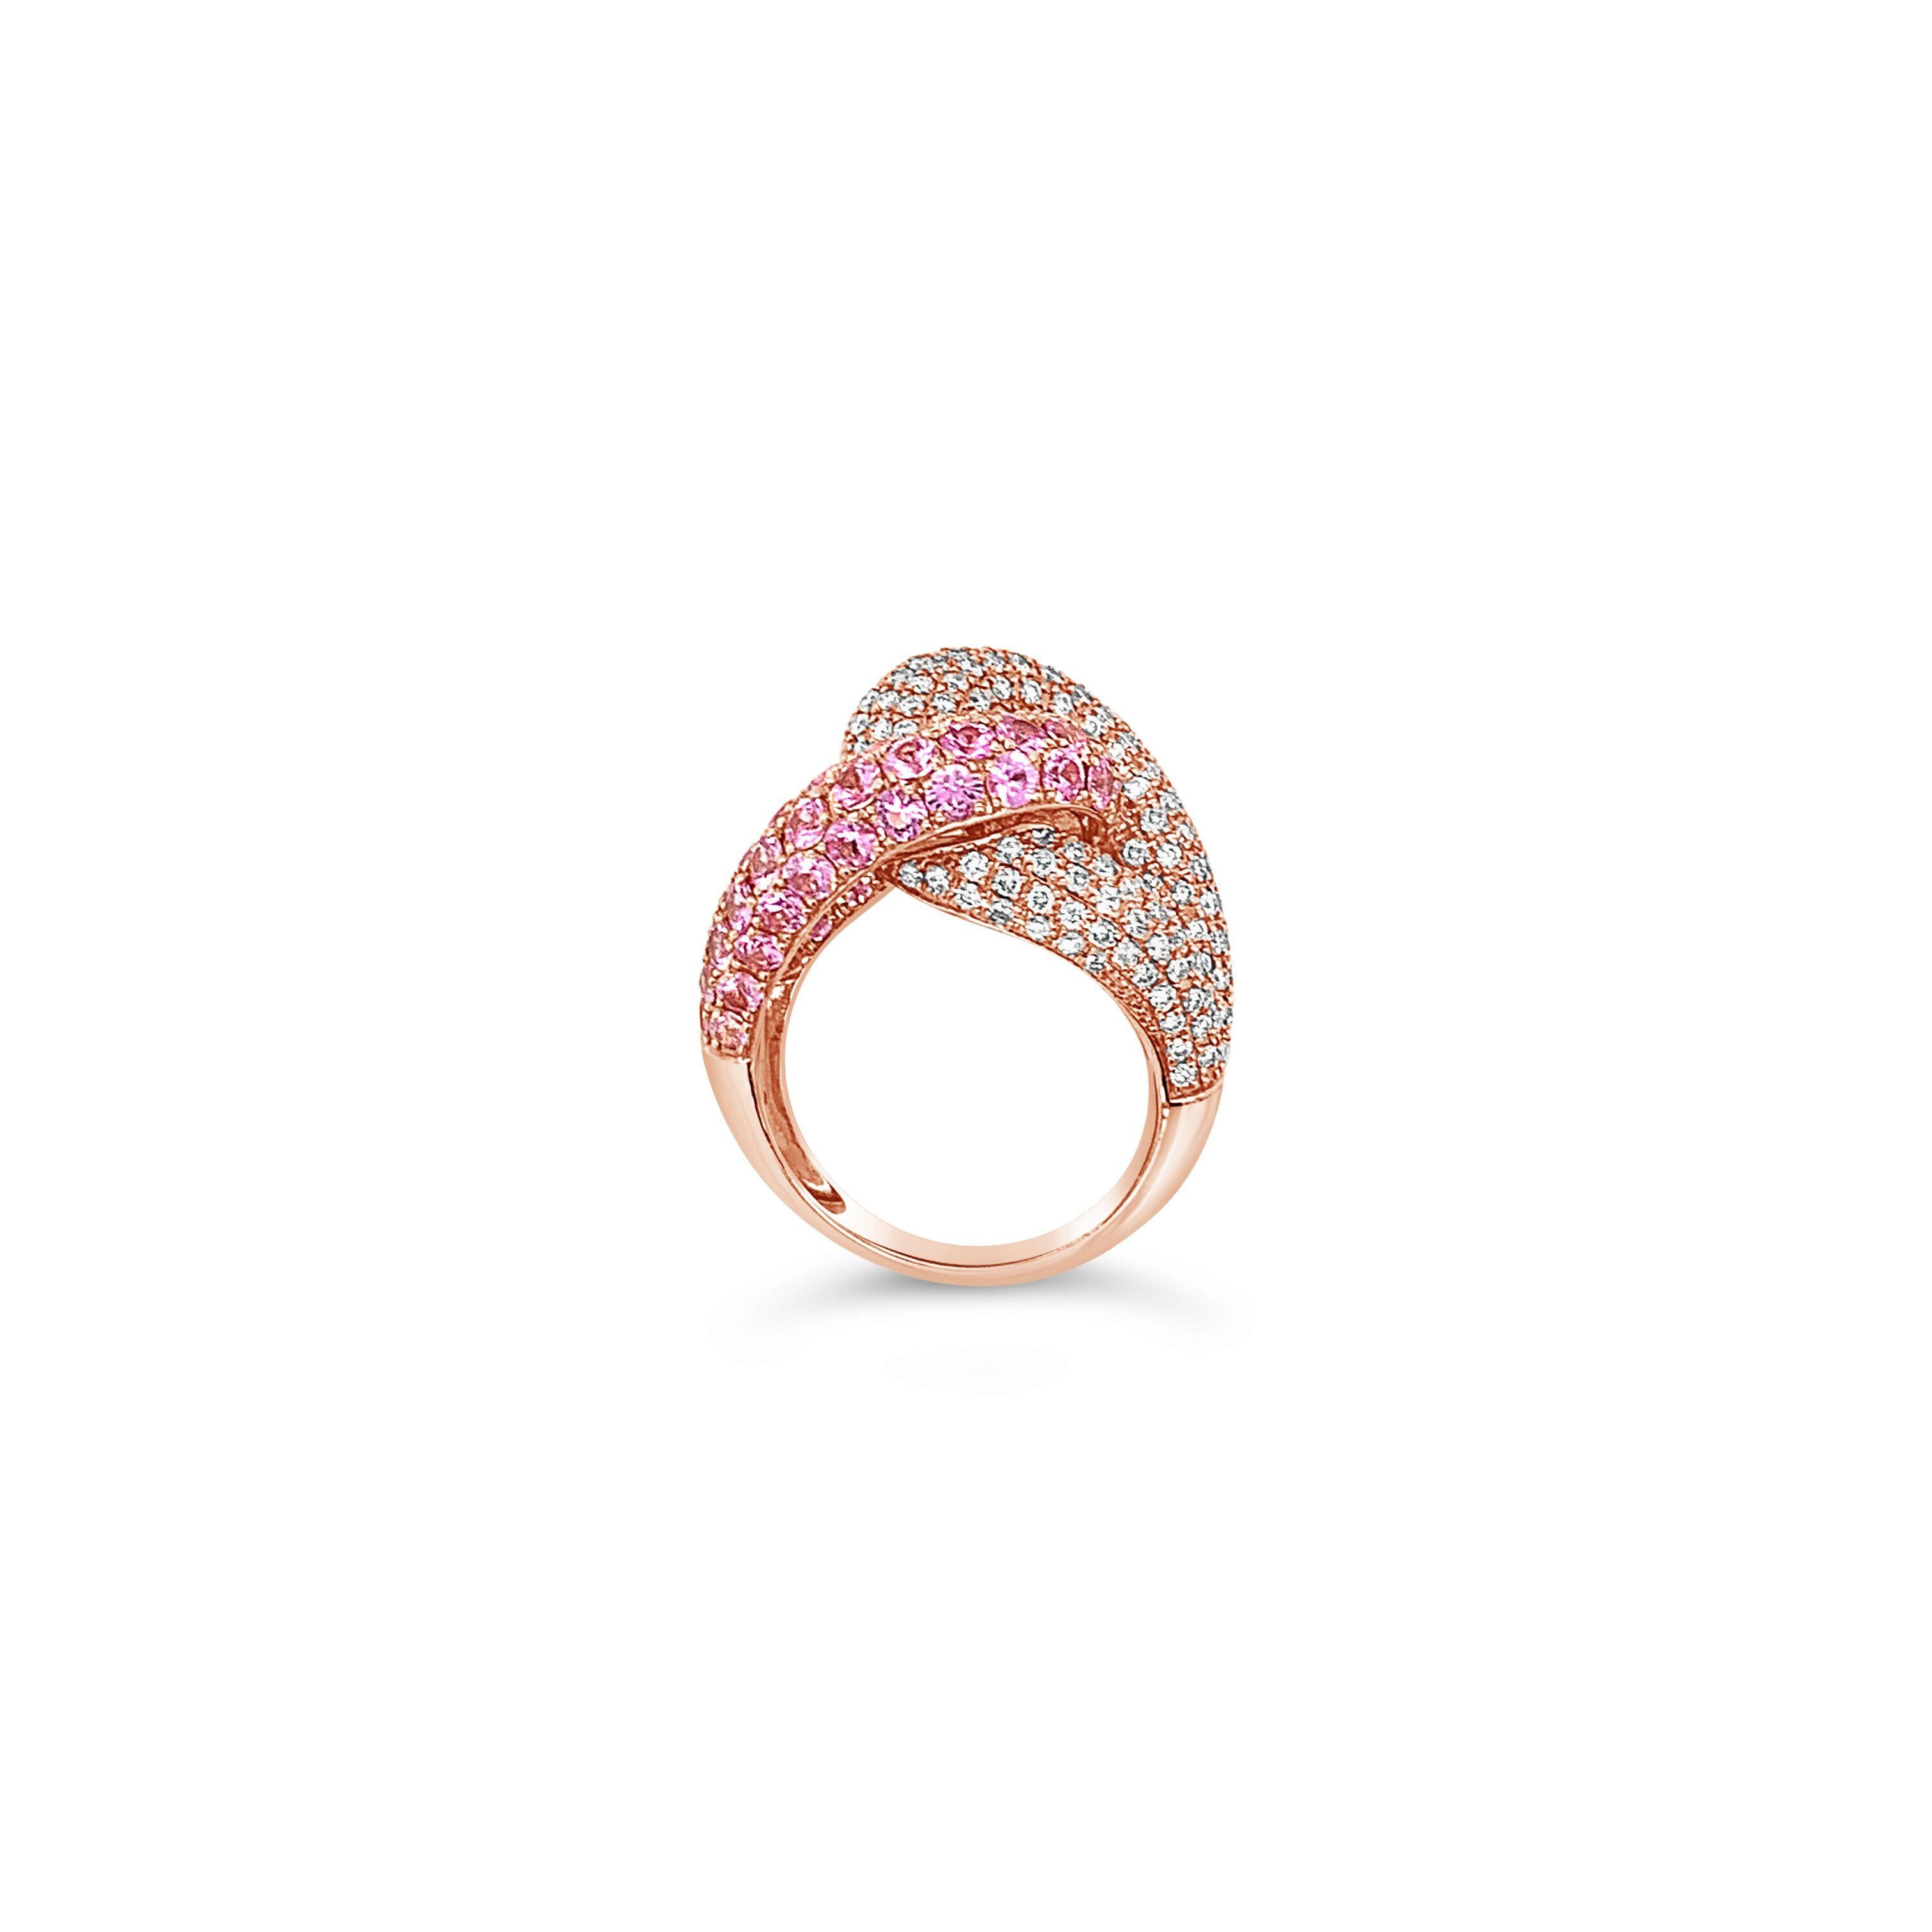 Le Vian® Ring featuring 3 5/8 cts. Bubble Gum Pink Sapphire™, 1 1/5 cts. Vanilla Diamonds® set in 14K Strawberry Gold®

Ring may or may not be sizable, please feel free to reach out with any questions!

Item comes with a Le Vian® jewelry box as well